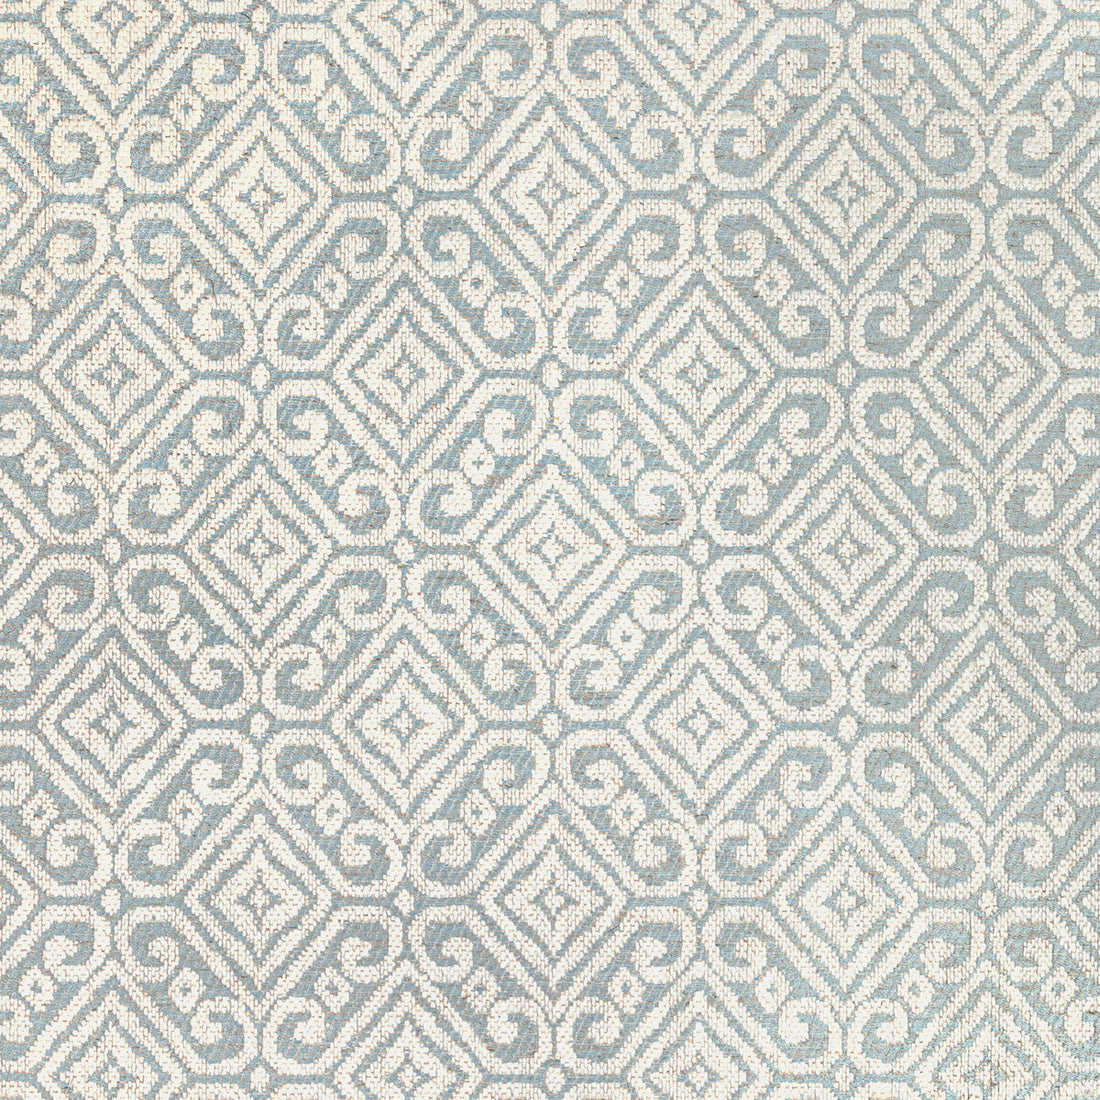 Prado Weave fabric in sky color - pattern 2021106.15.0 - by Lee Jofa in the Triana Weaves collection